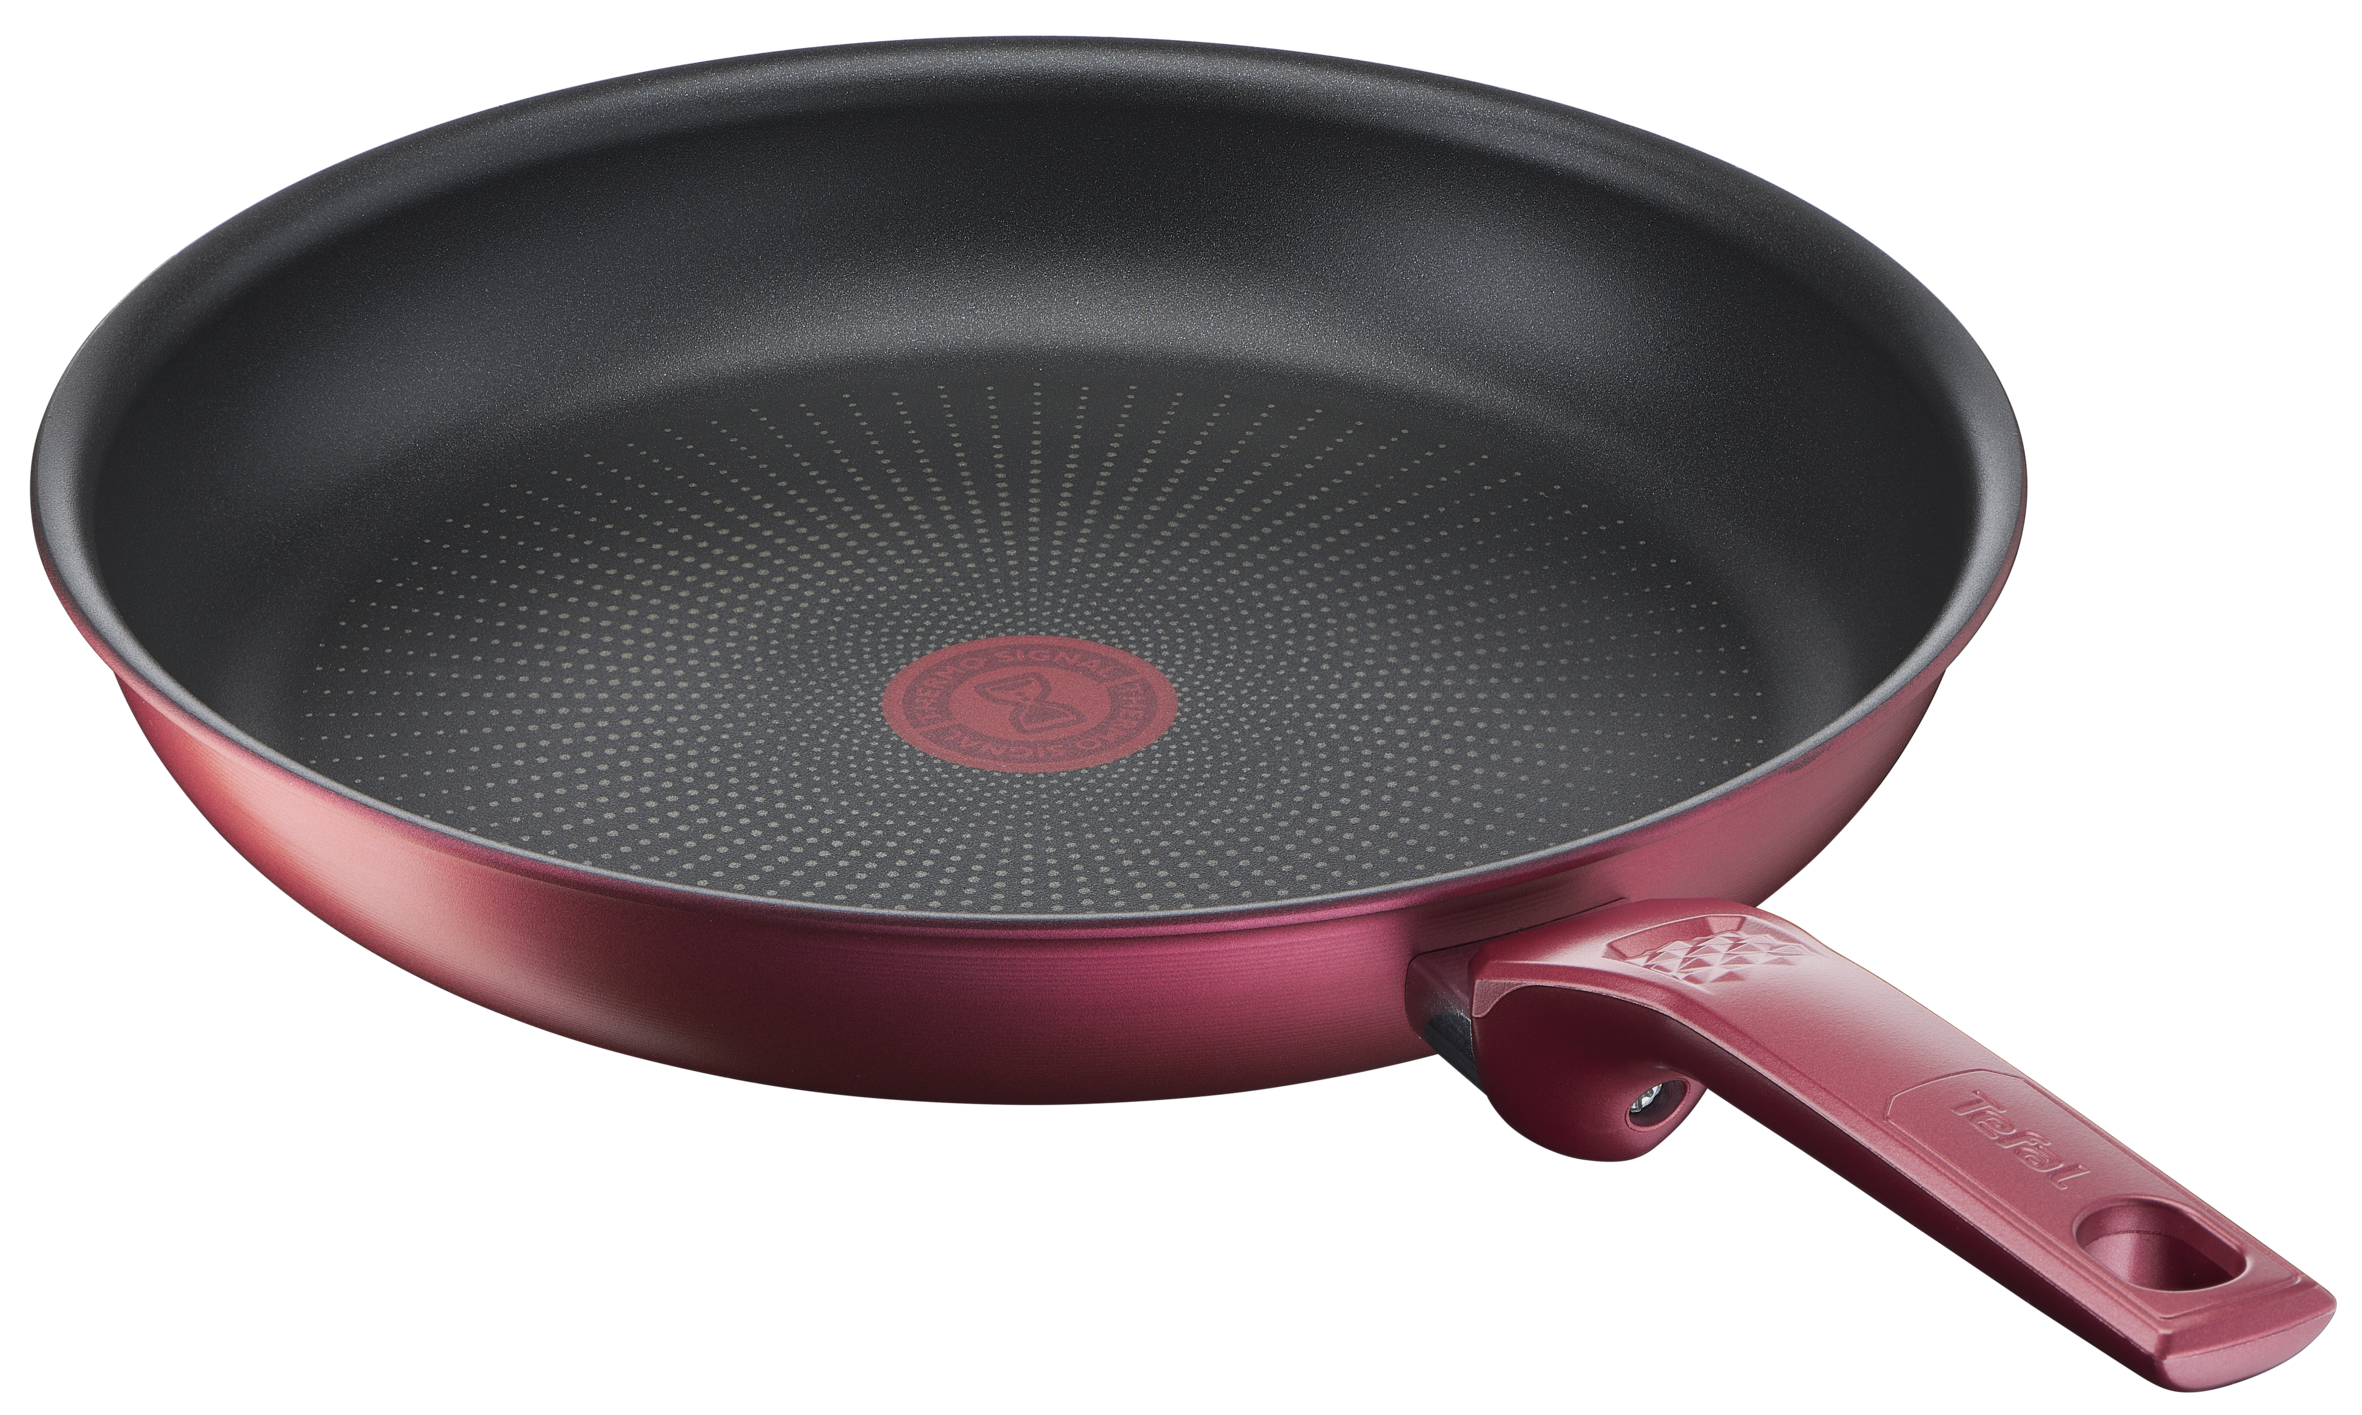 Tefal Daily Chef Red Non-Stick Induction Twin Pack Frypan Set 22/28cm